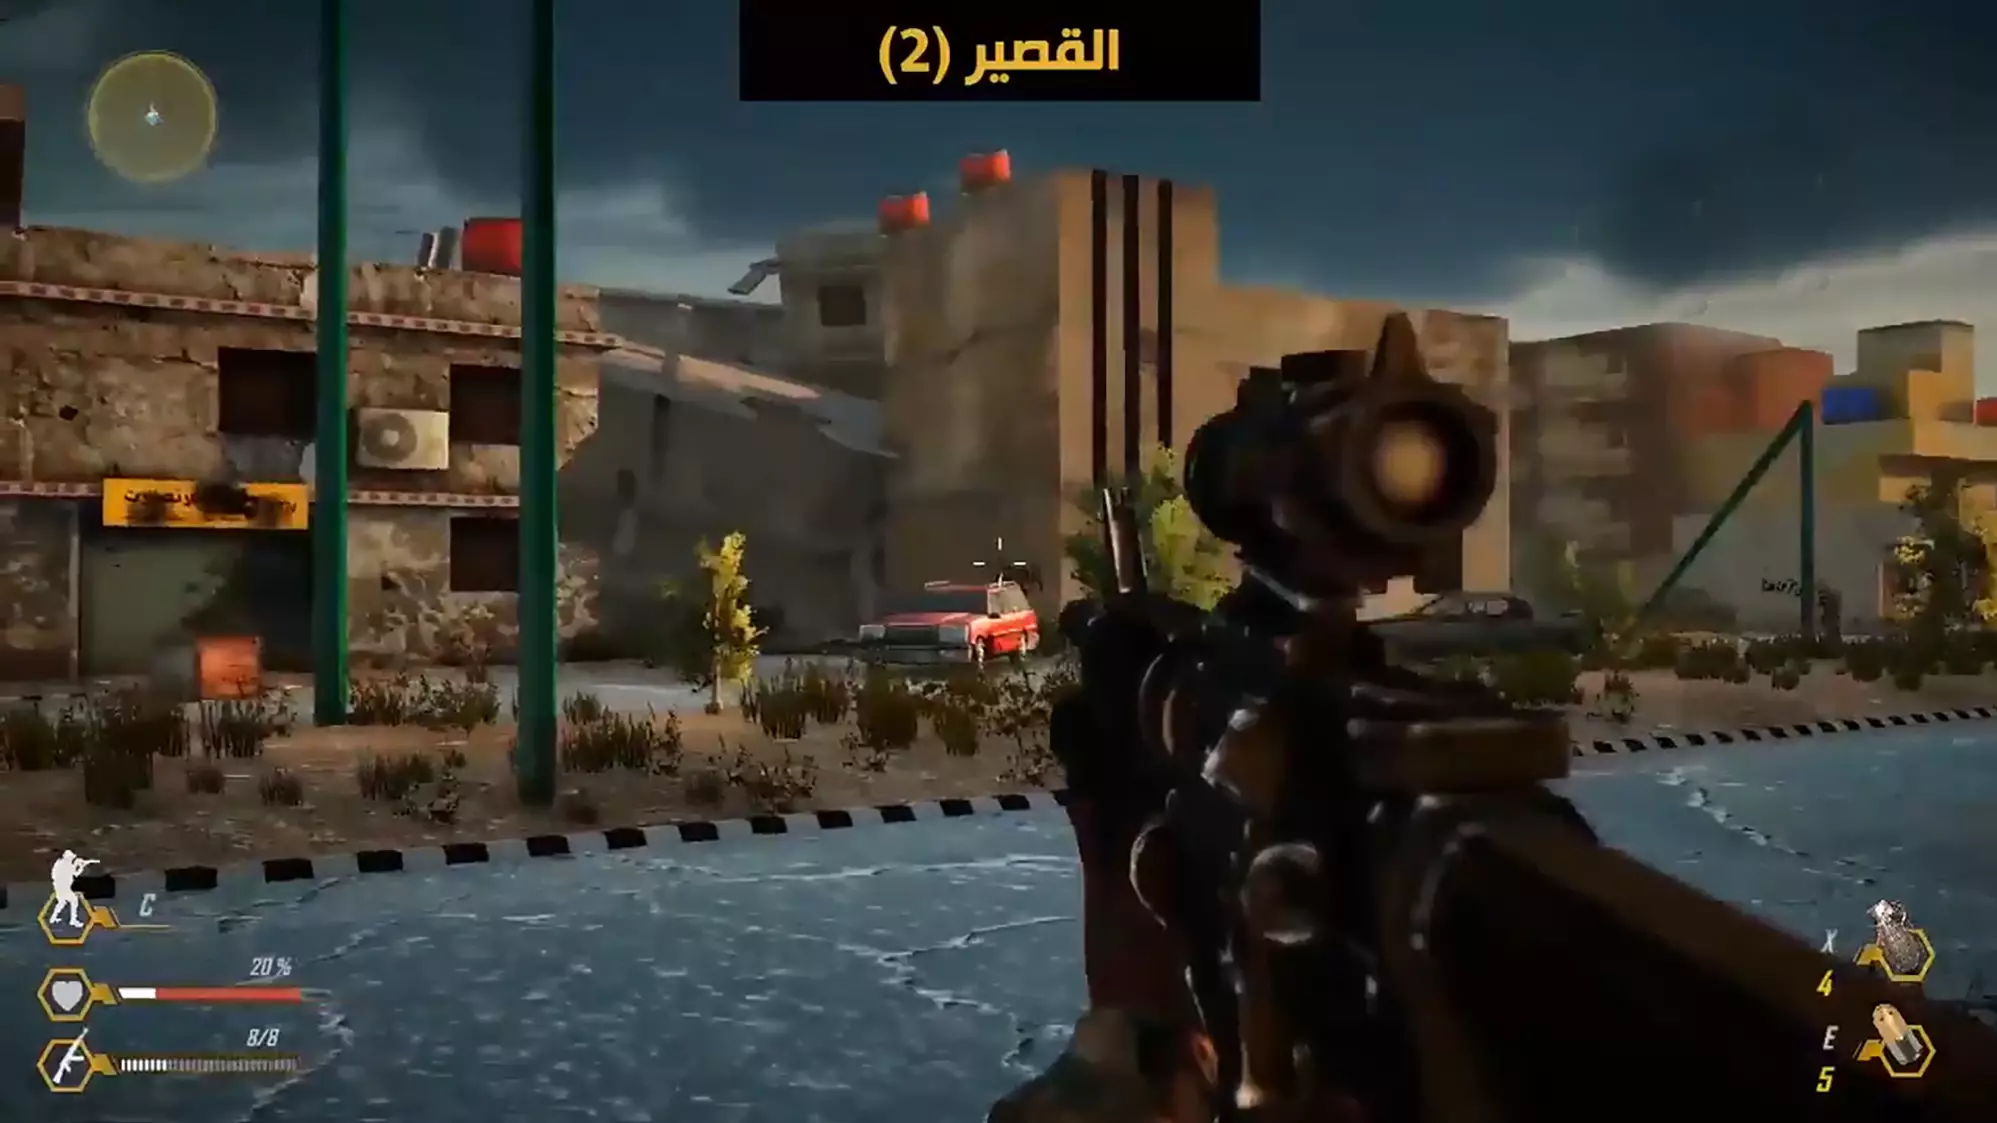 Terrorist Organisation Releases Violent Video Game To Gain New Recruits